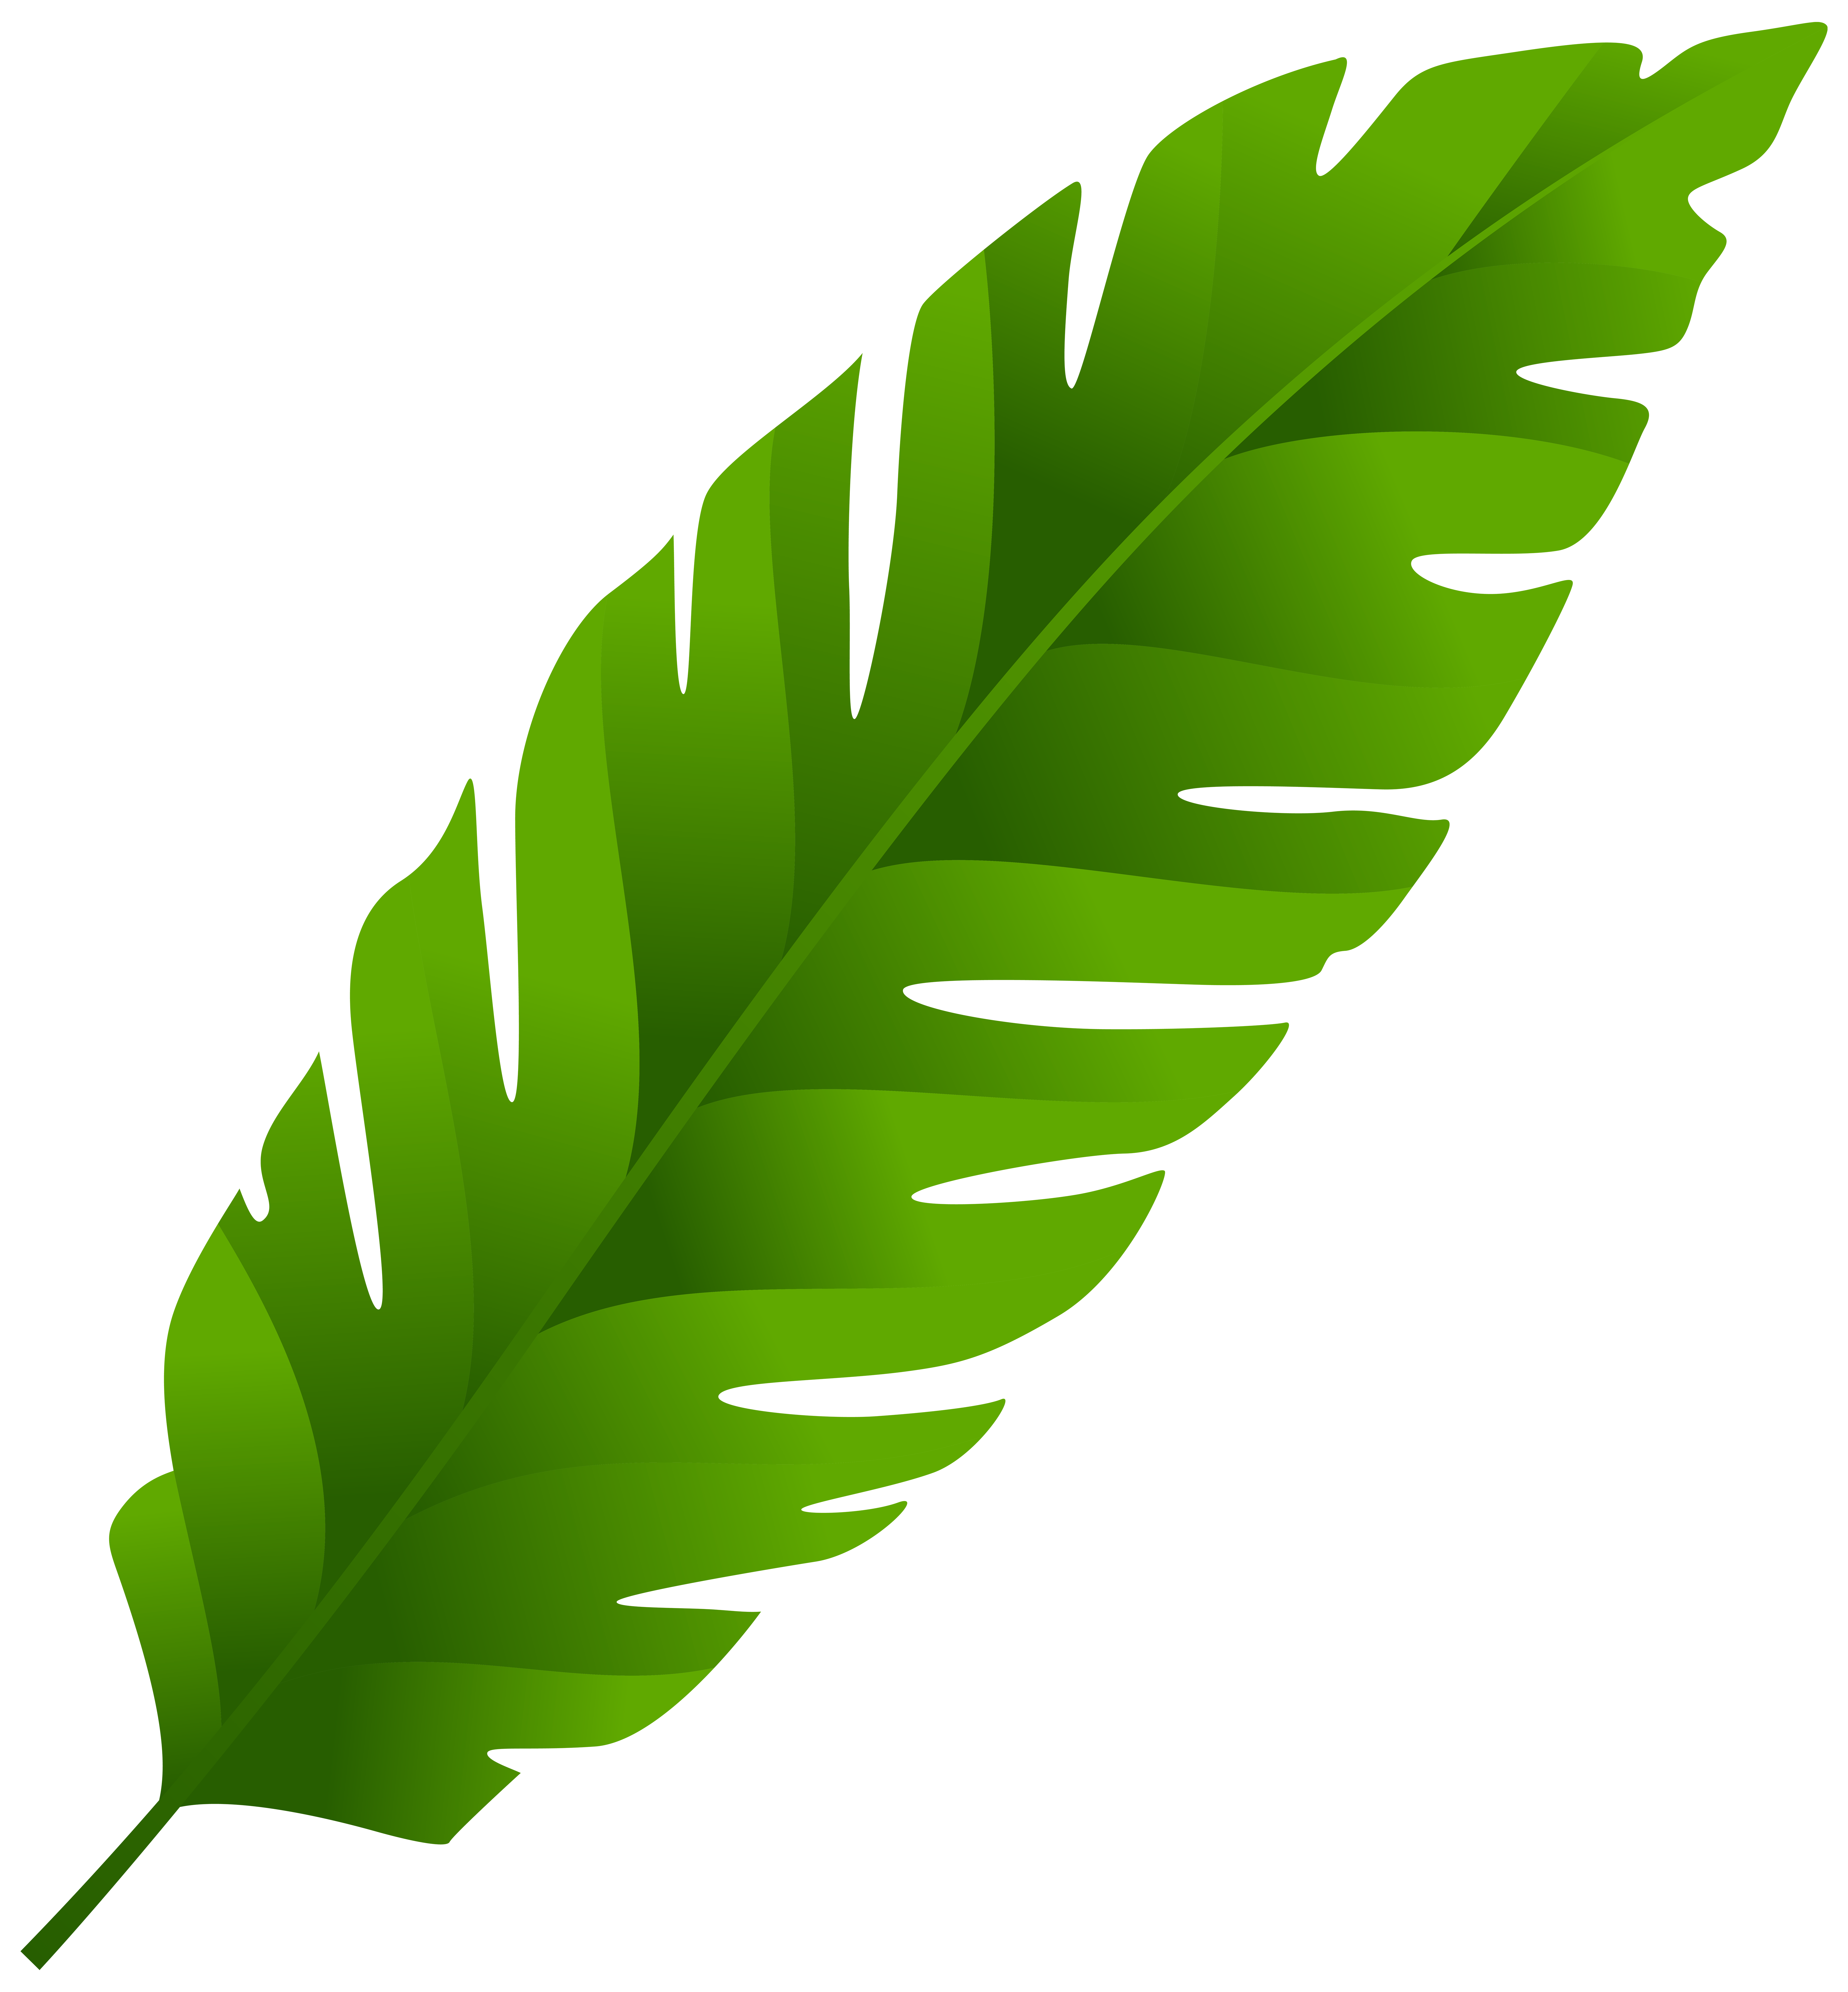 Leaves Clipart-Clipartlook.co